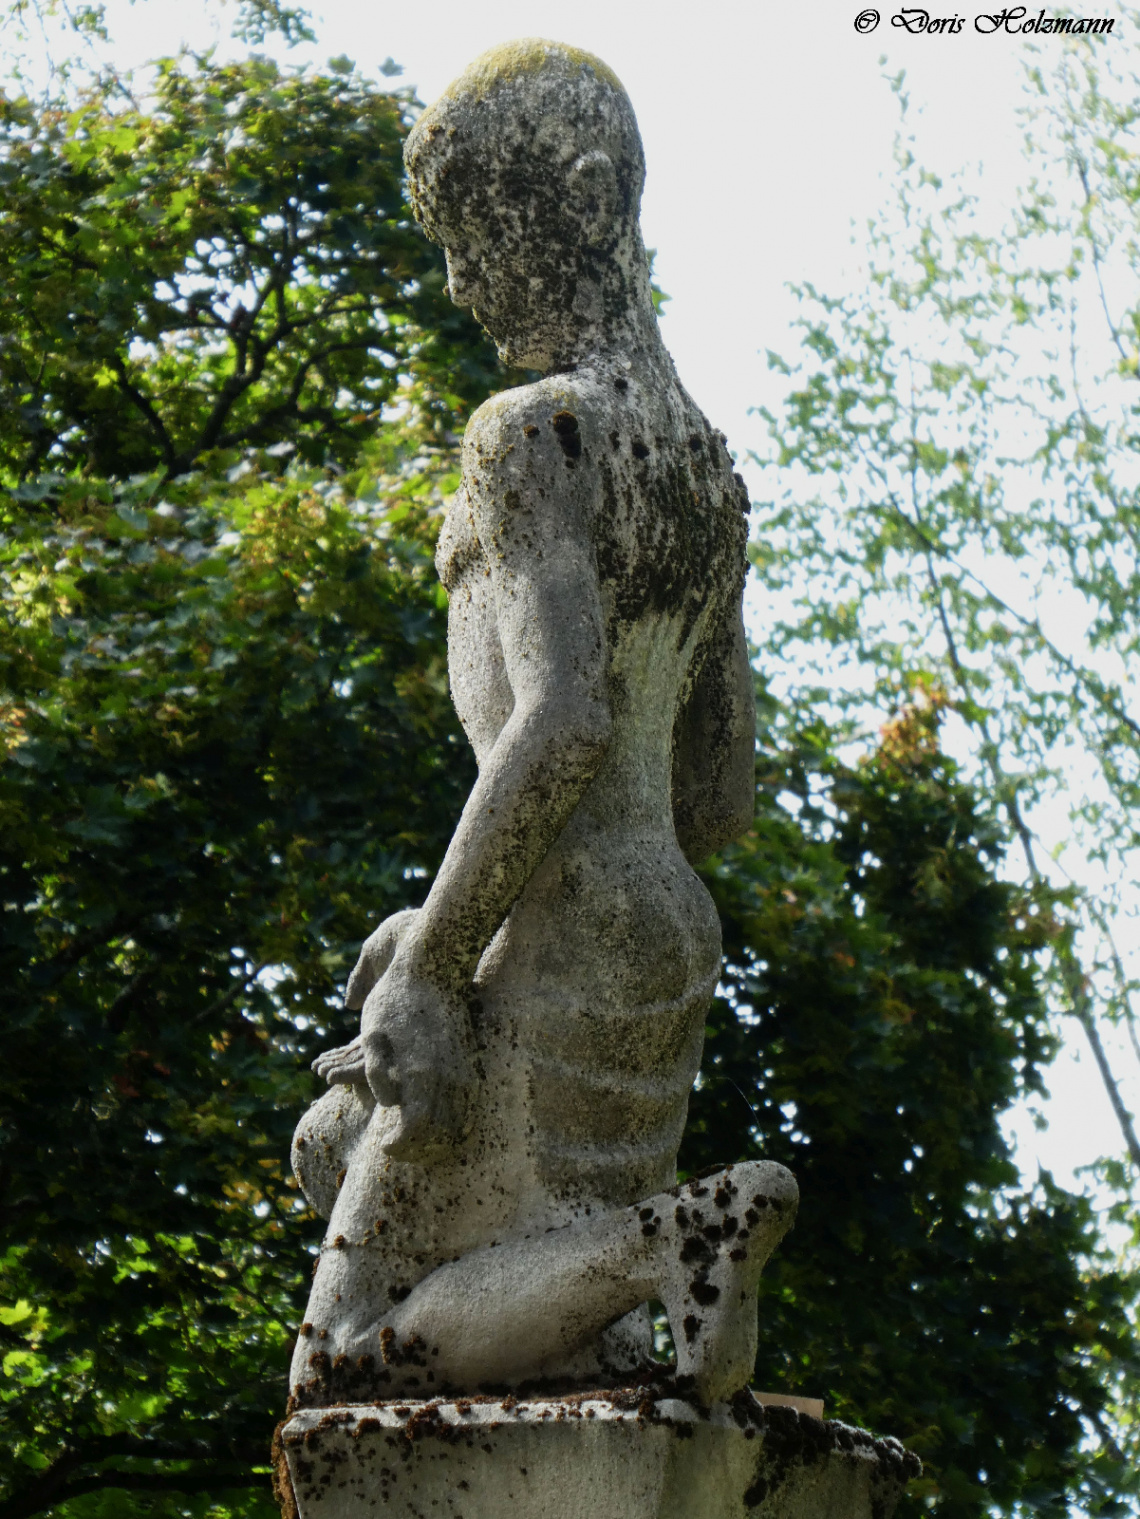 Statue in the Zoological Garden, Karlsruhe / Germa